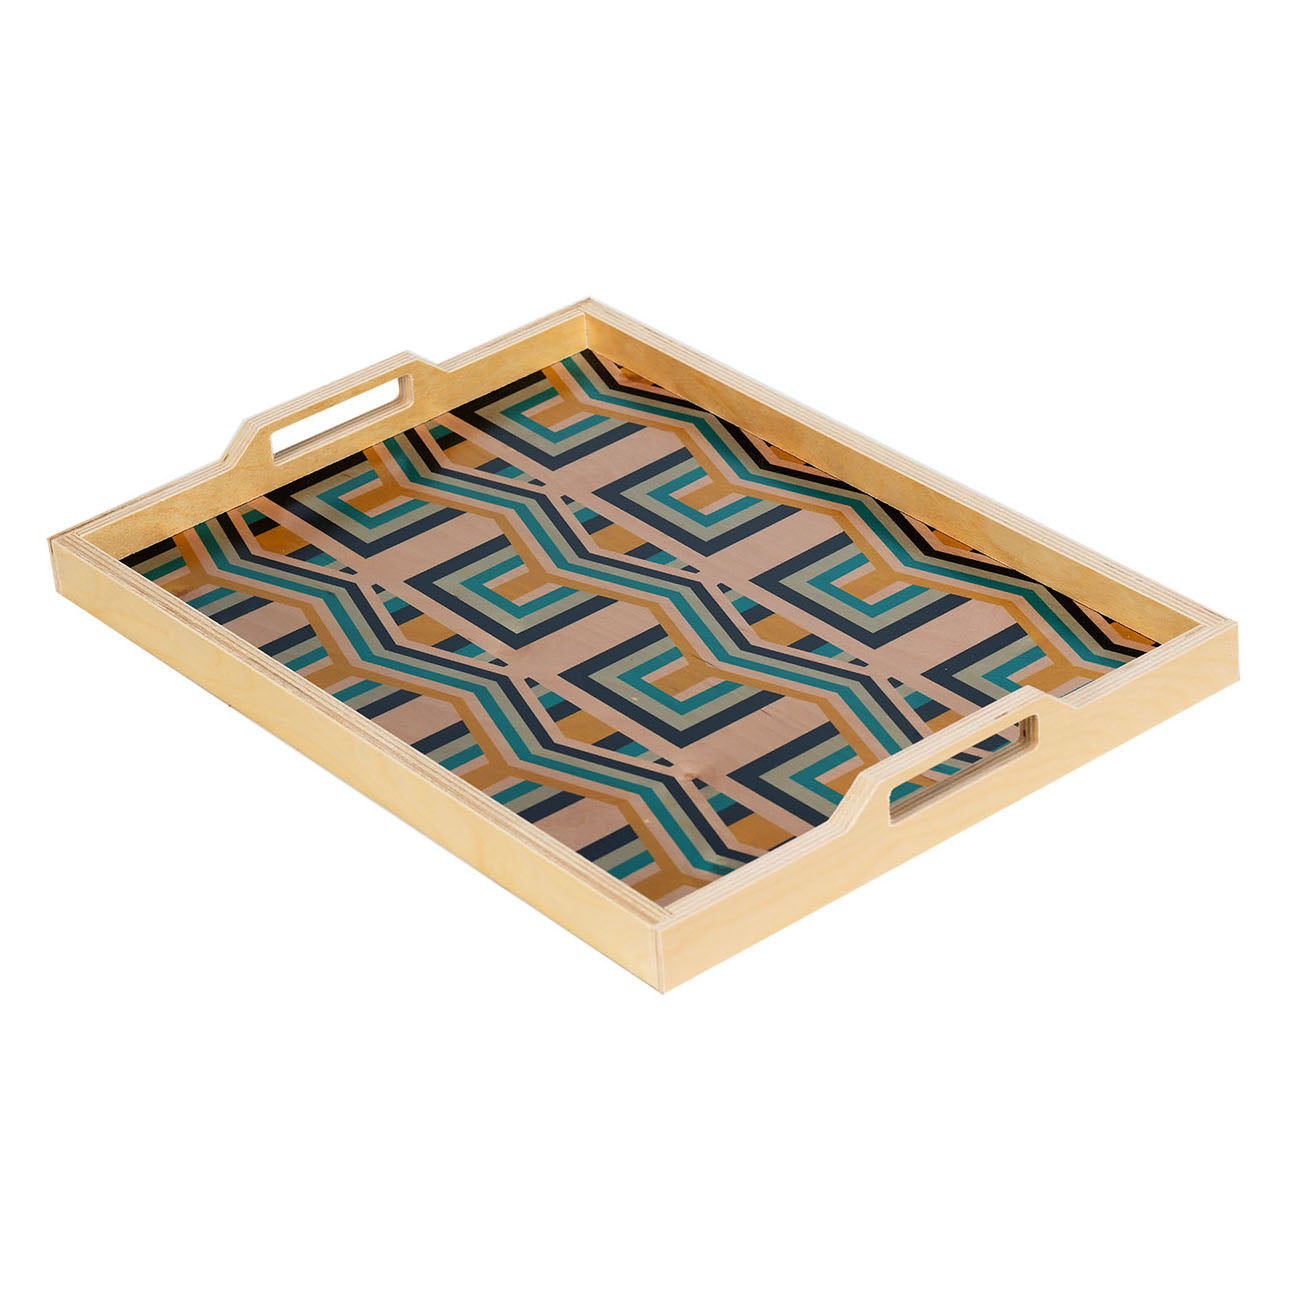 Shareen grey/teal serving tray